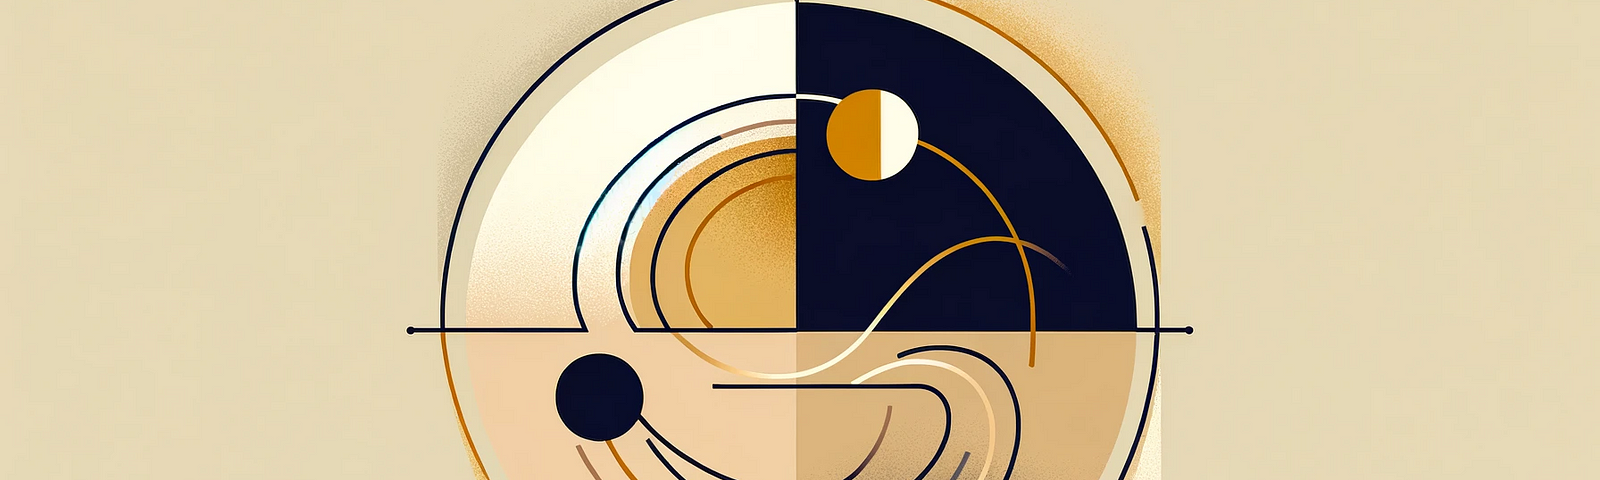 An abstract representation of decision-making featuring colors of beige, bright gold, and dark violet, symbolizing the balance between intuition and analysis.